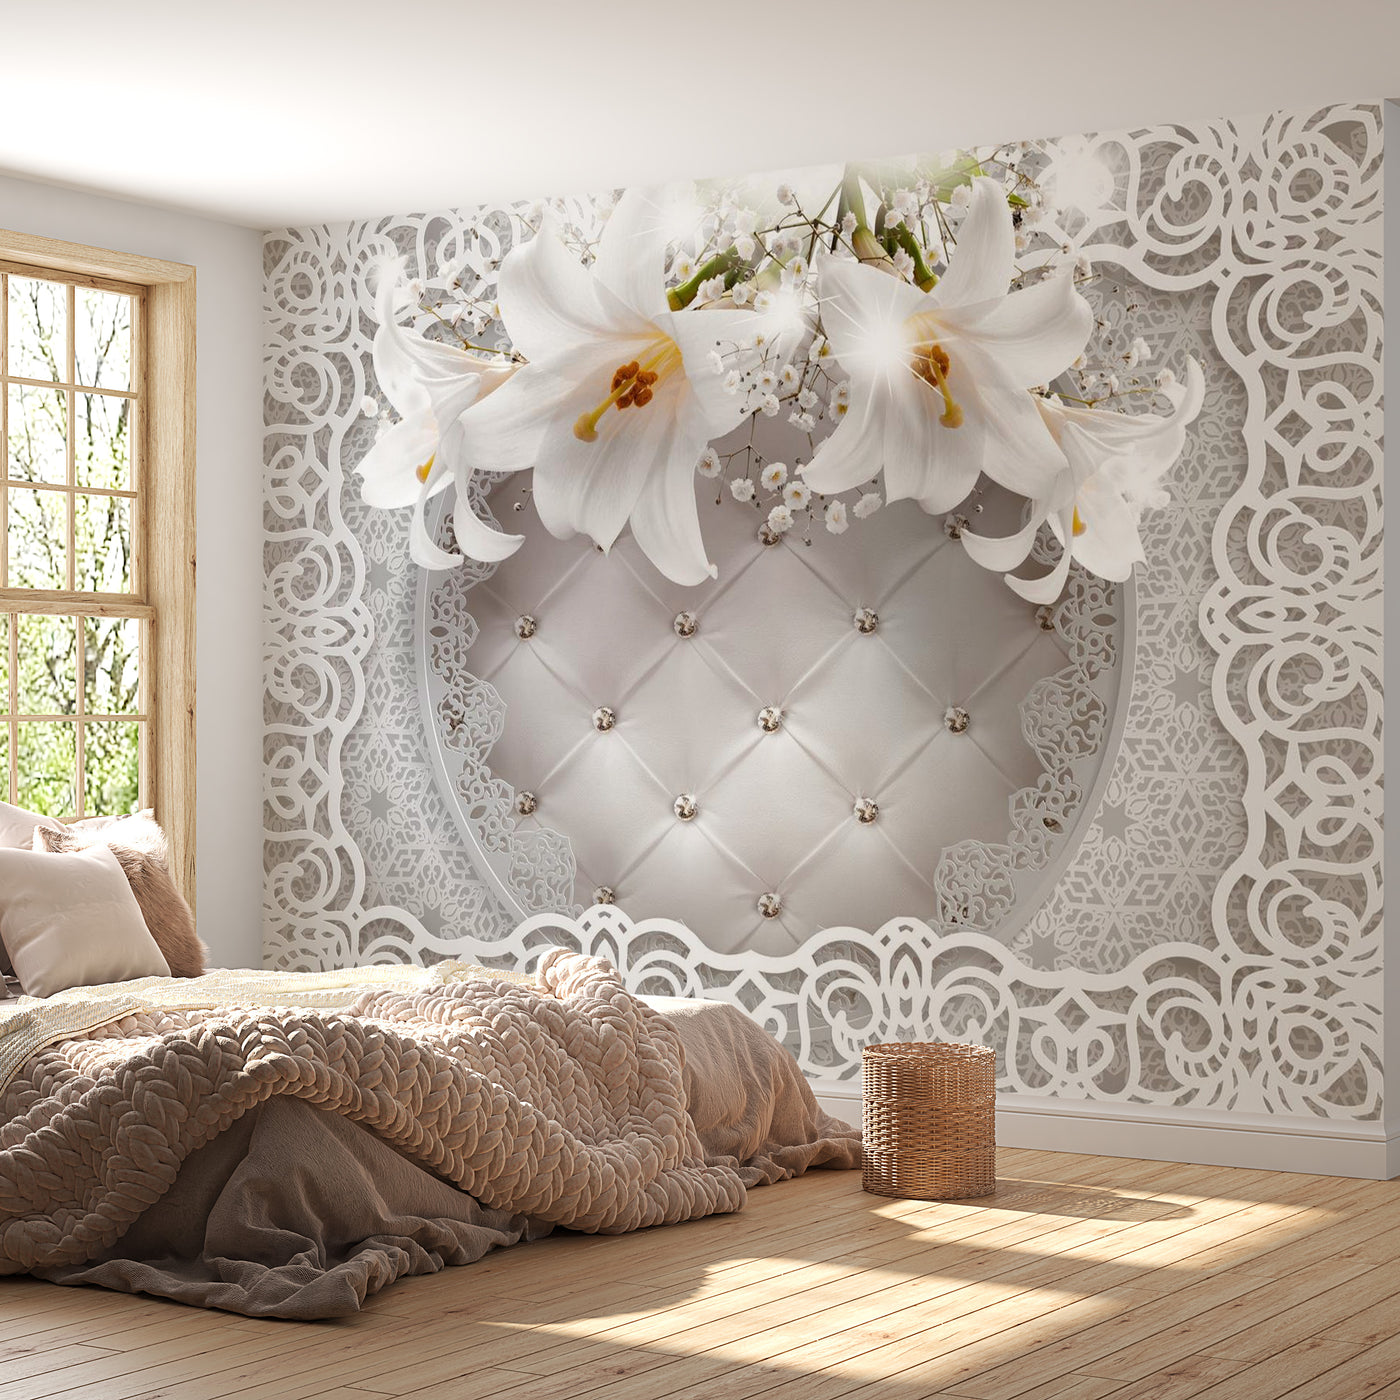 Peel & Stick Floral Wall Mural - Lilies And Quilted Background - Removable Wall Decals